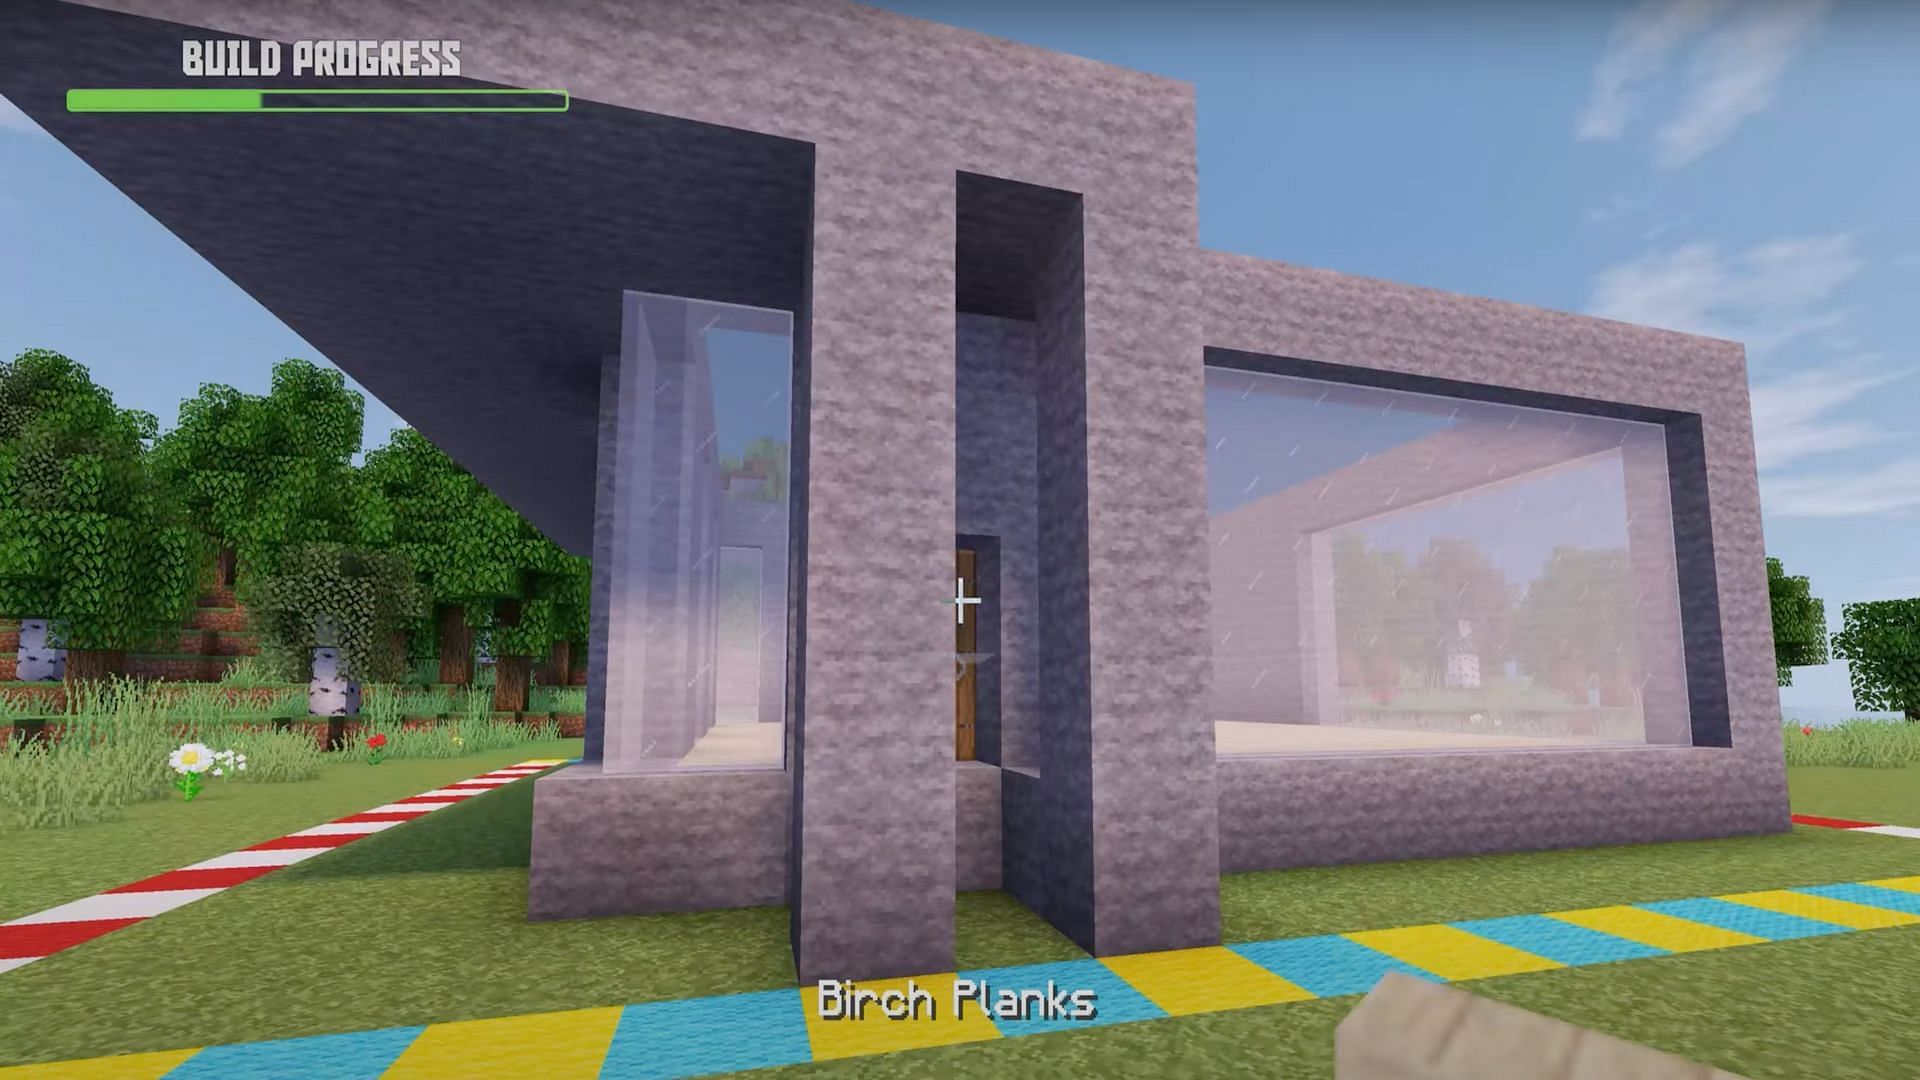 Players can start expanding the second floor and adding accents to the house to make it look more modern (Image via Greg Builds/YouTube)